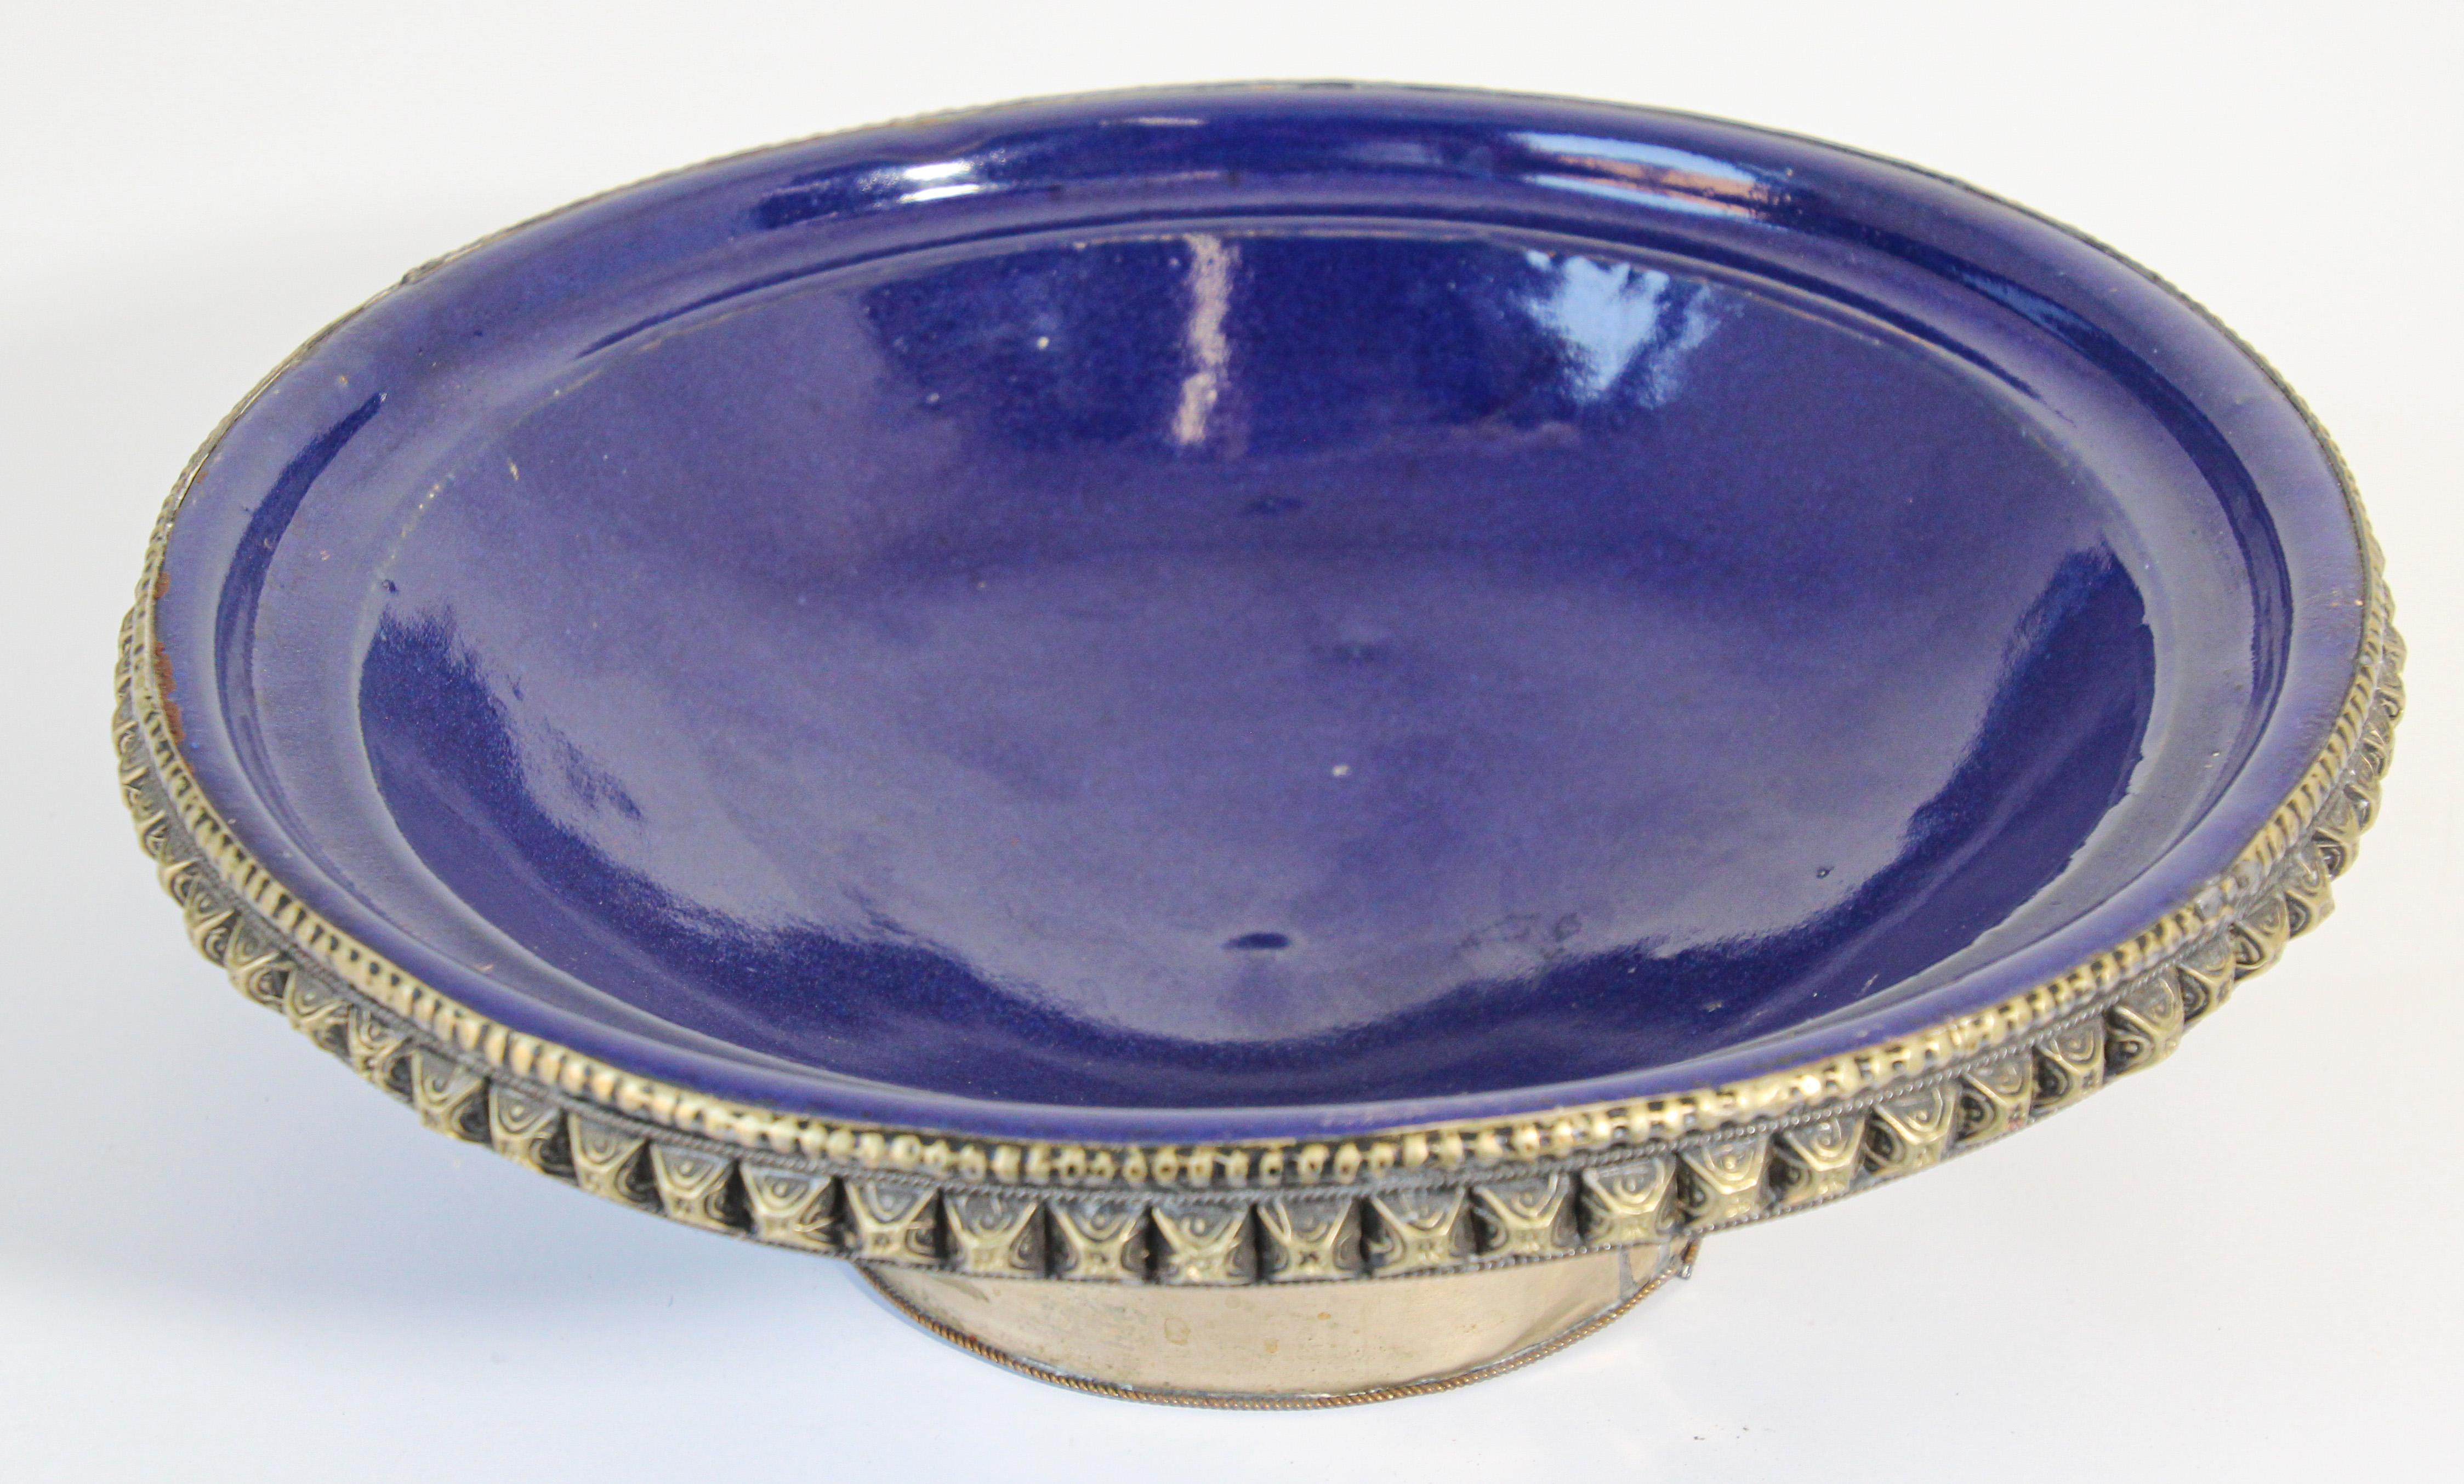 Beautiful cobalt blue Moroccan footed ceramic bowl with silvered metal overlay. 
Great large decorative ceramic bowl. 
Measures: Diameter 11 inches x 4 inches height.